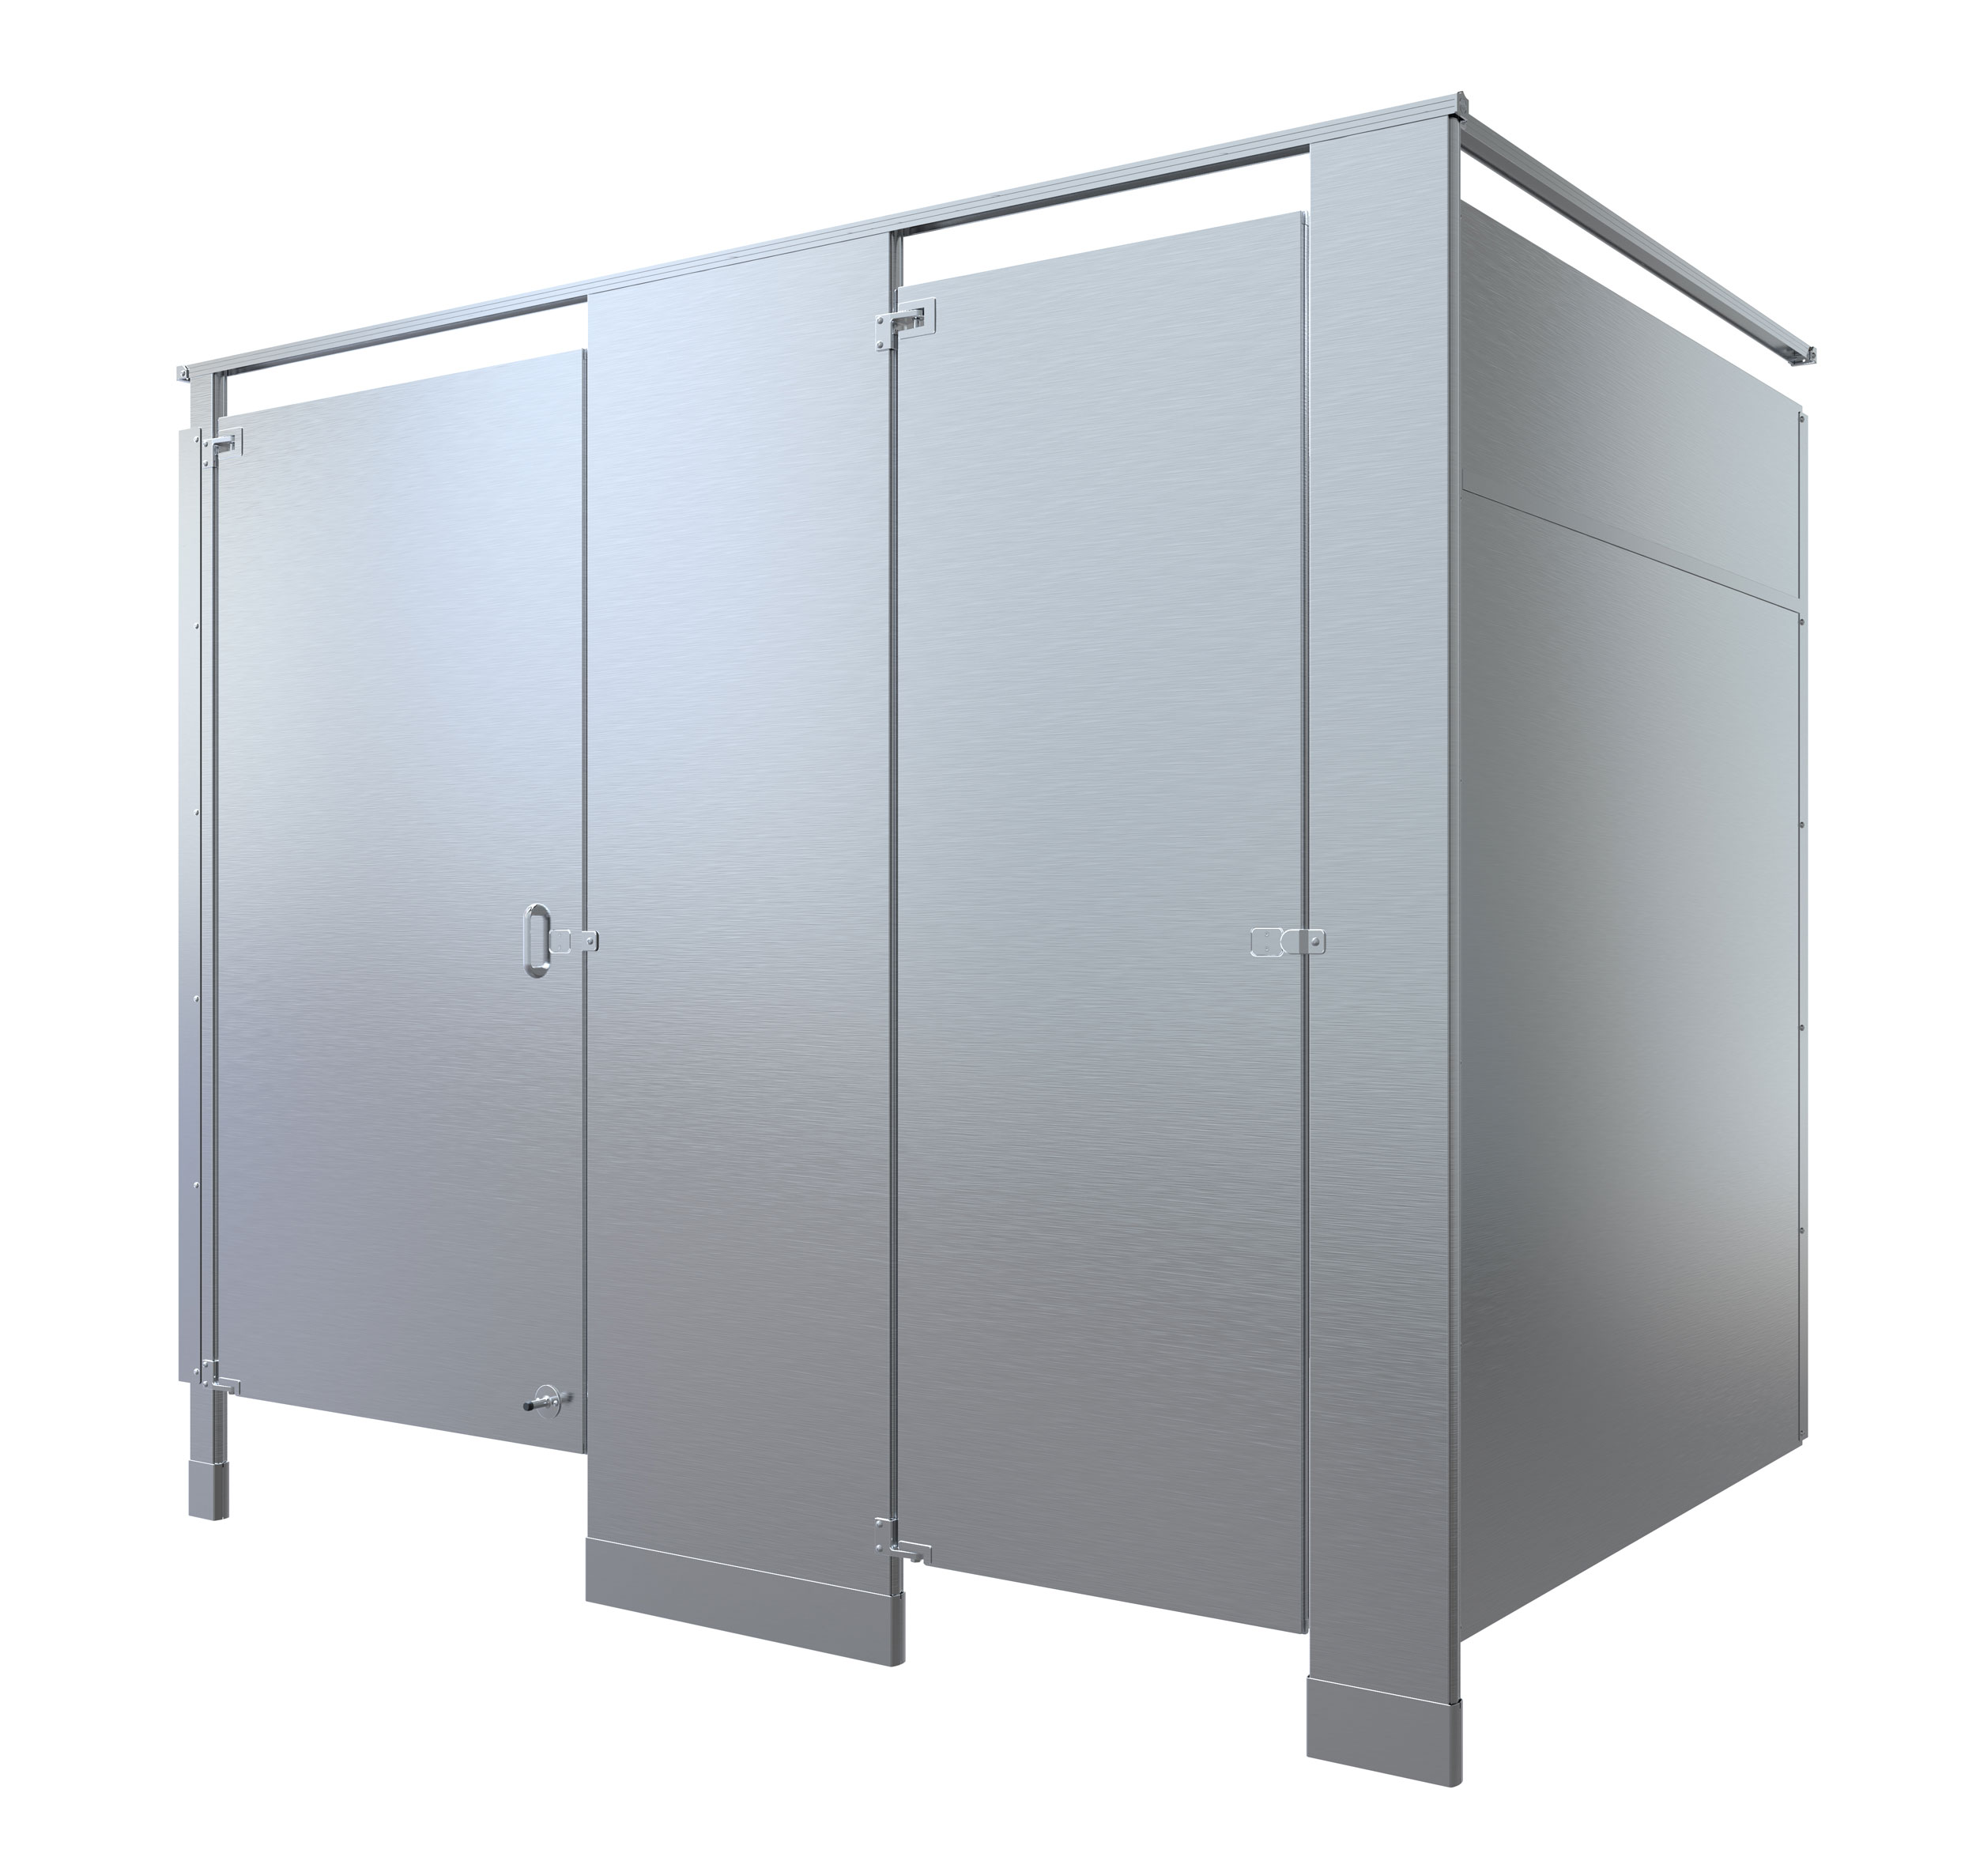 Mills Privacy Toilet Partitions Bradley Corp